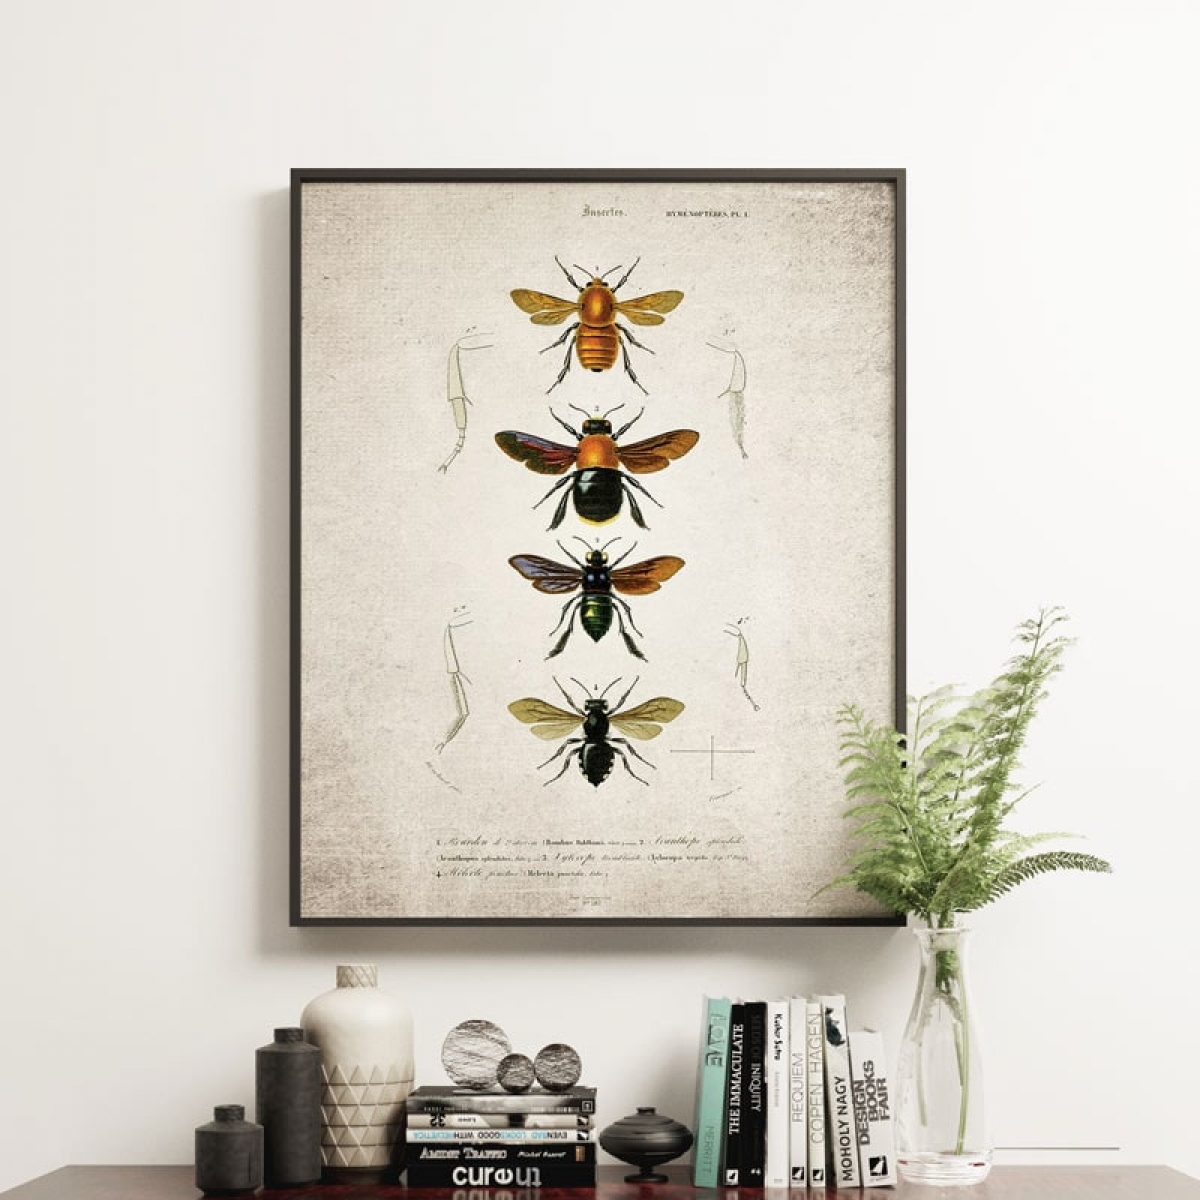  Vintage Entomology Giclee Print (Bees Plate From 1907)